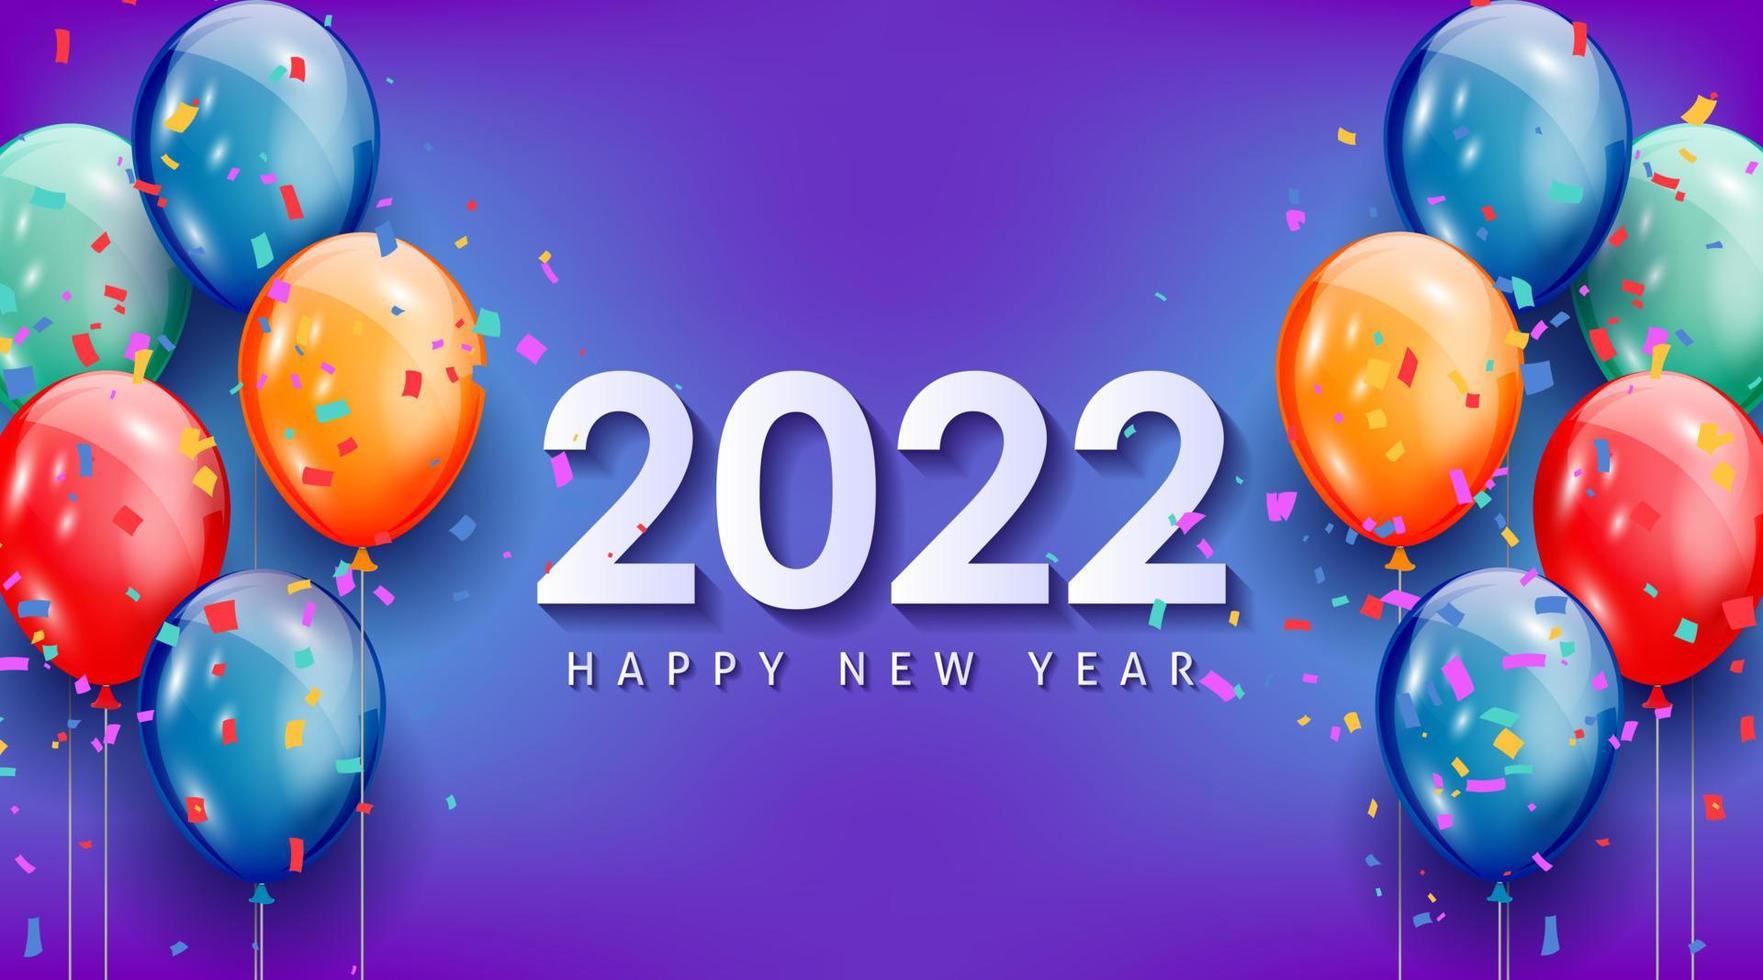 Happy new year 2022 greeting card with realistic colorful balloons celebration background design for greeting card, poster, banner. Vector illustration.